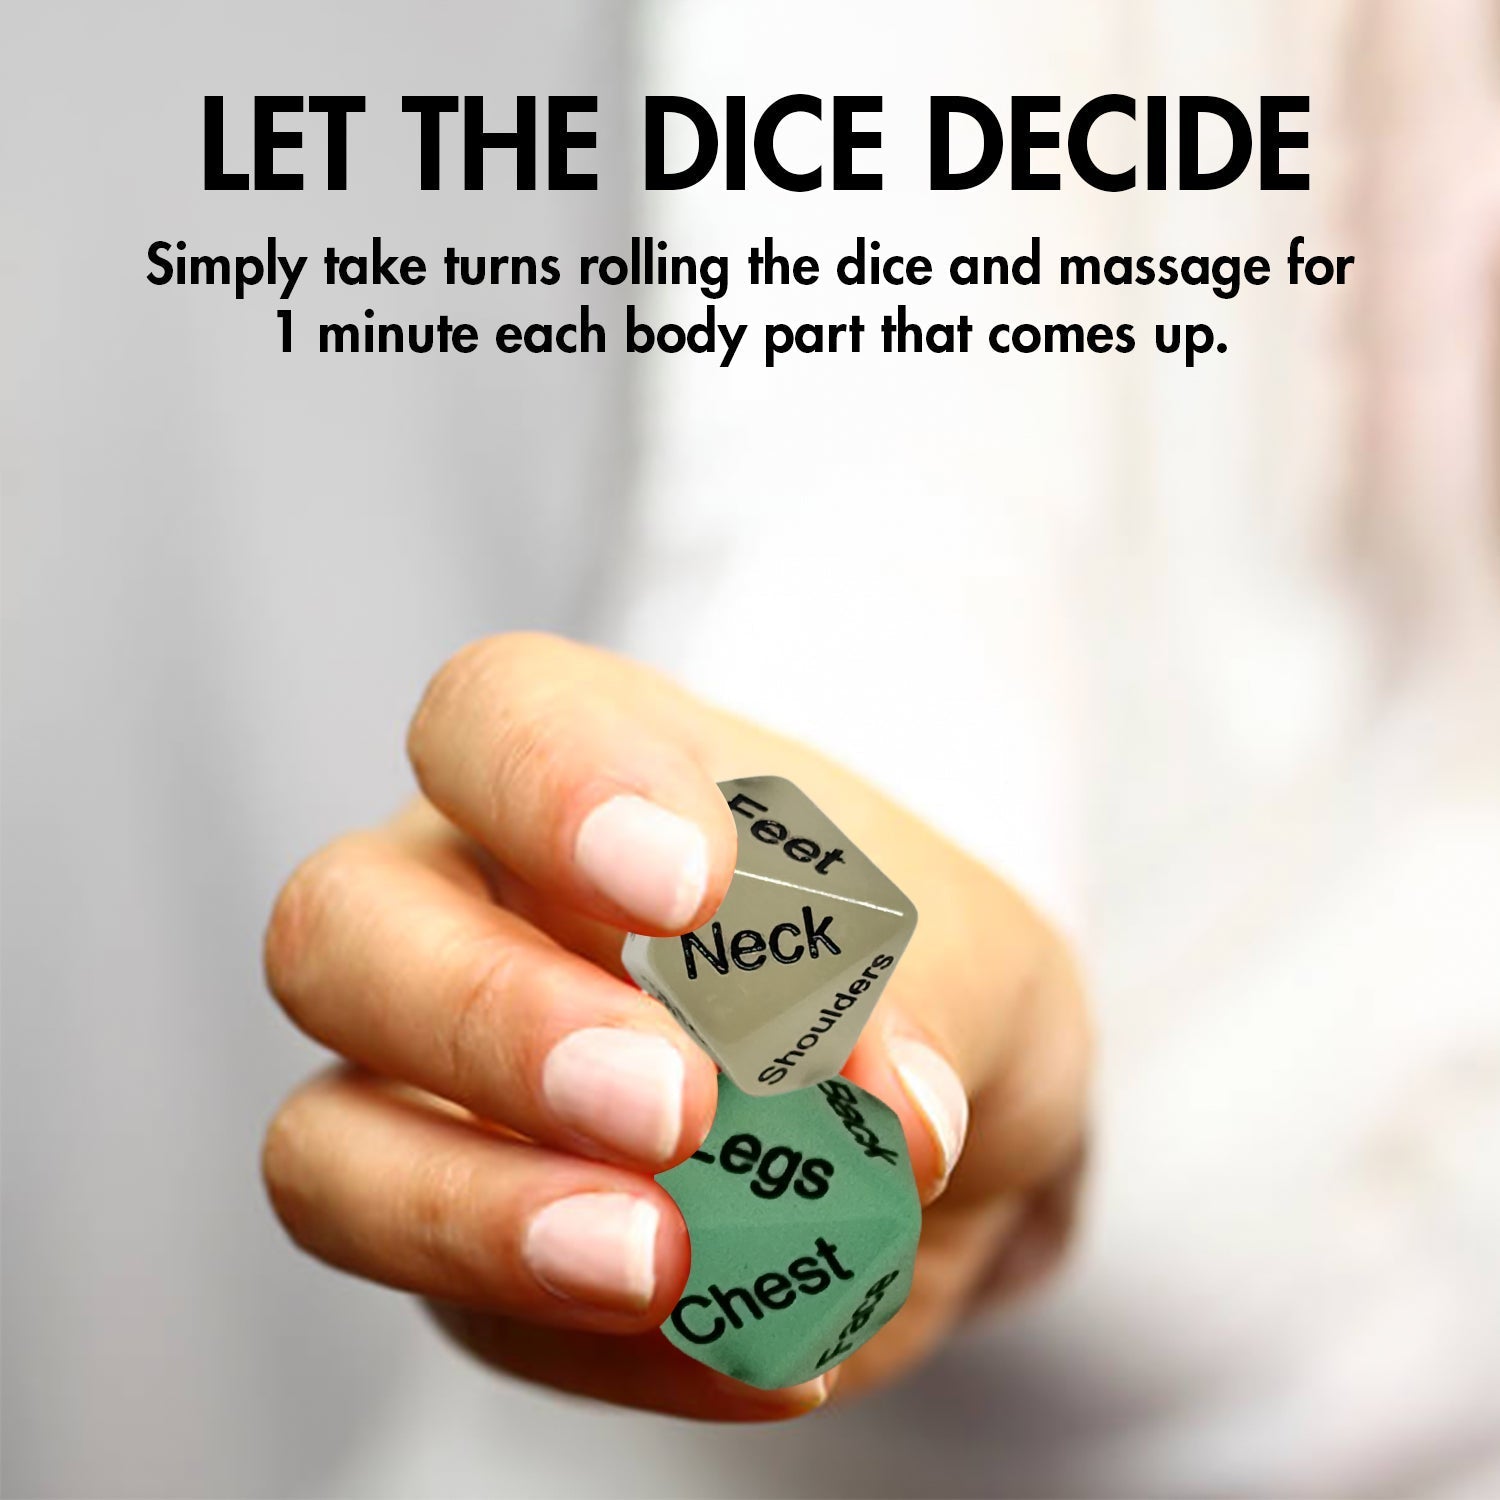 Juicy by Mon Cheri's Couples Massage Oil and Rolling Dice Game